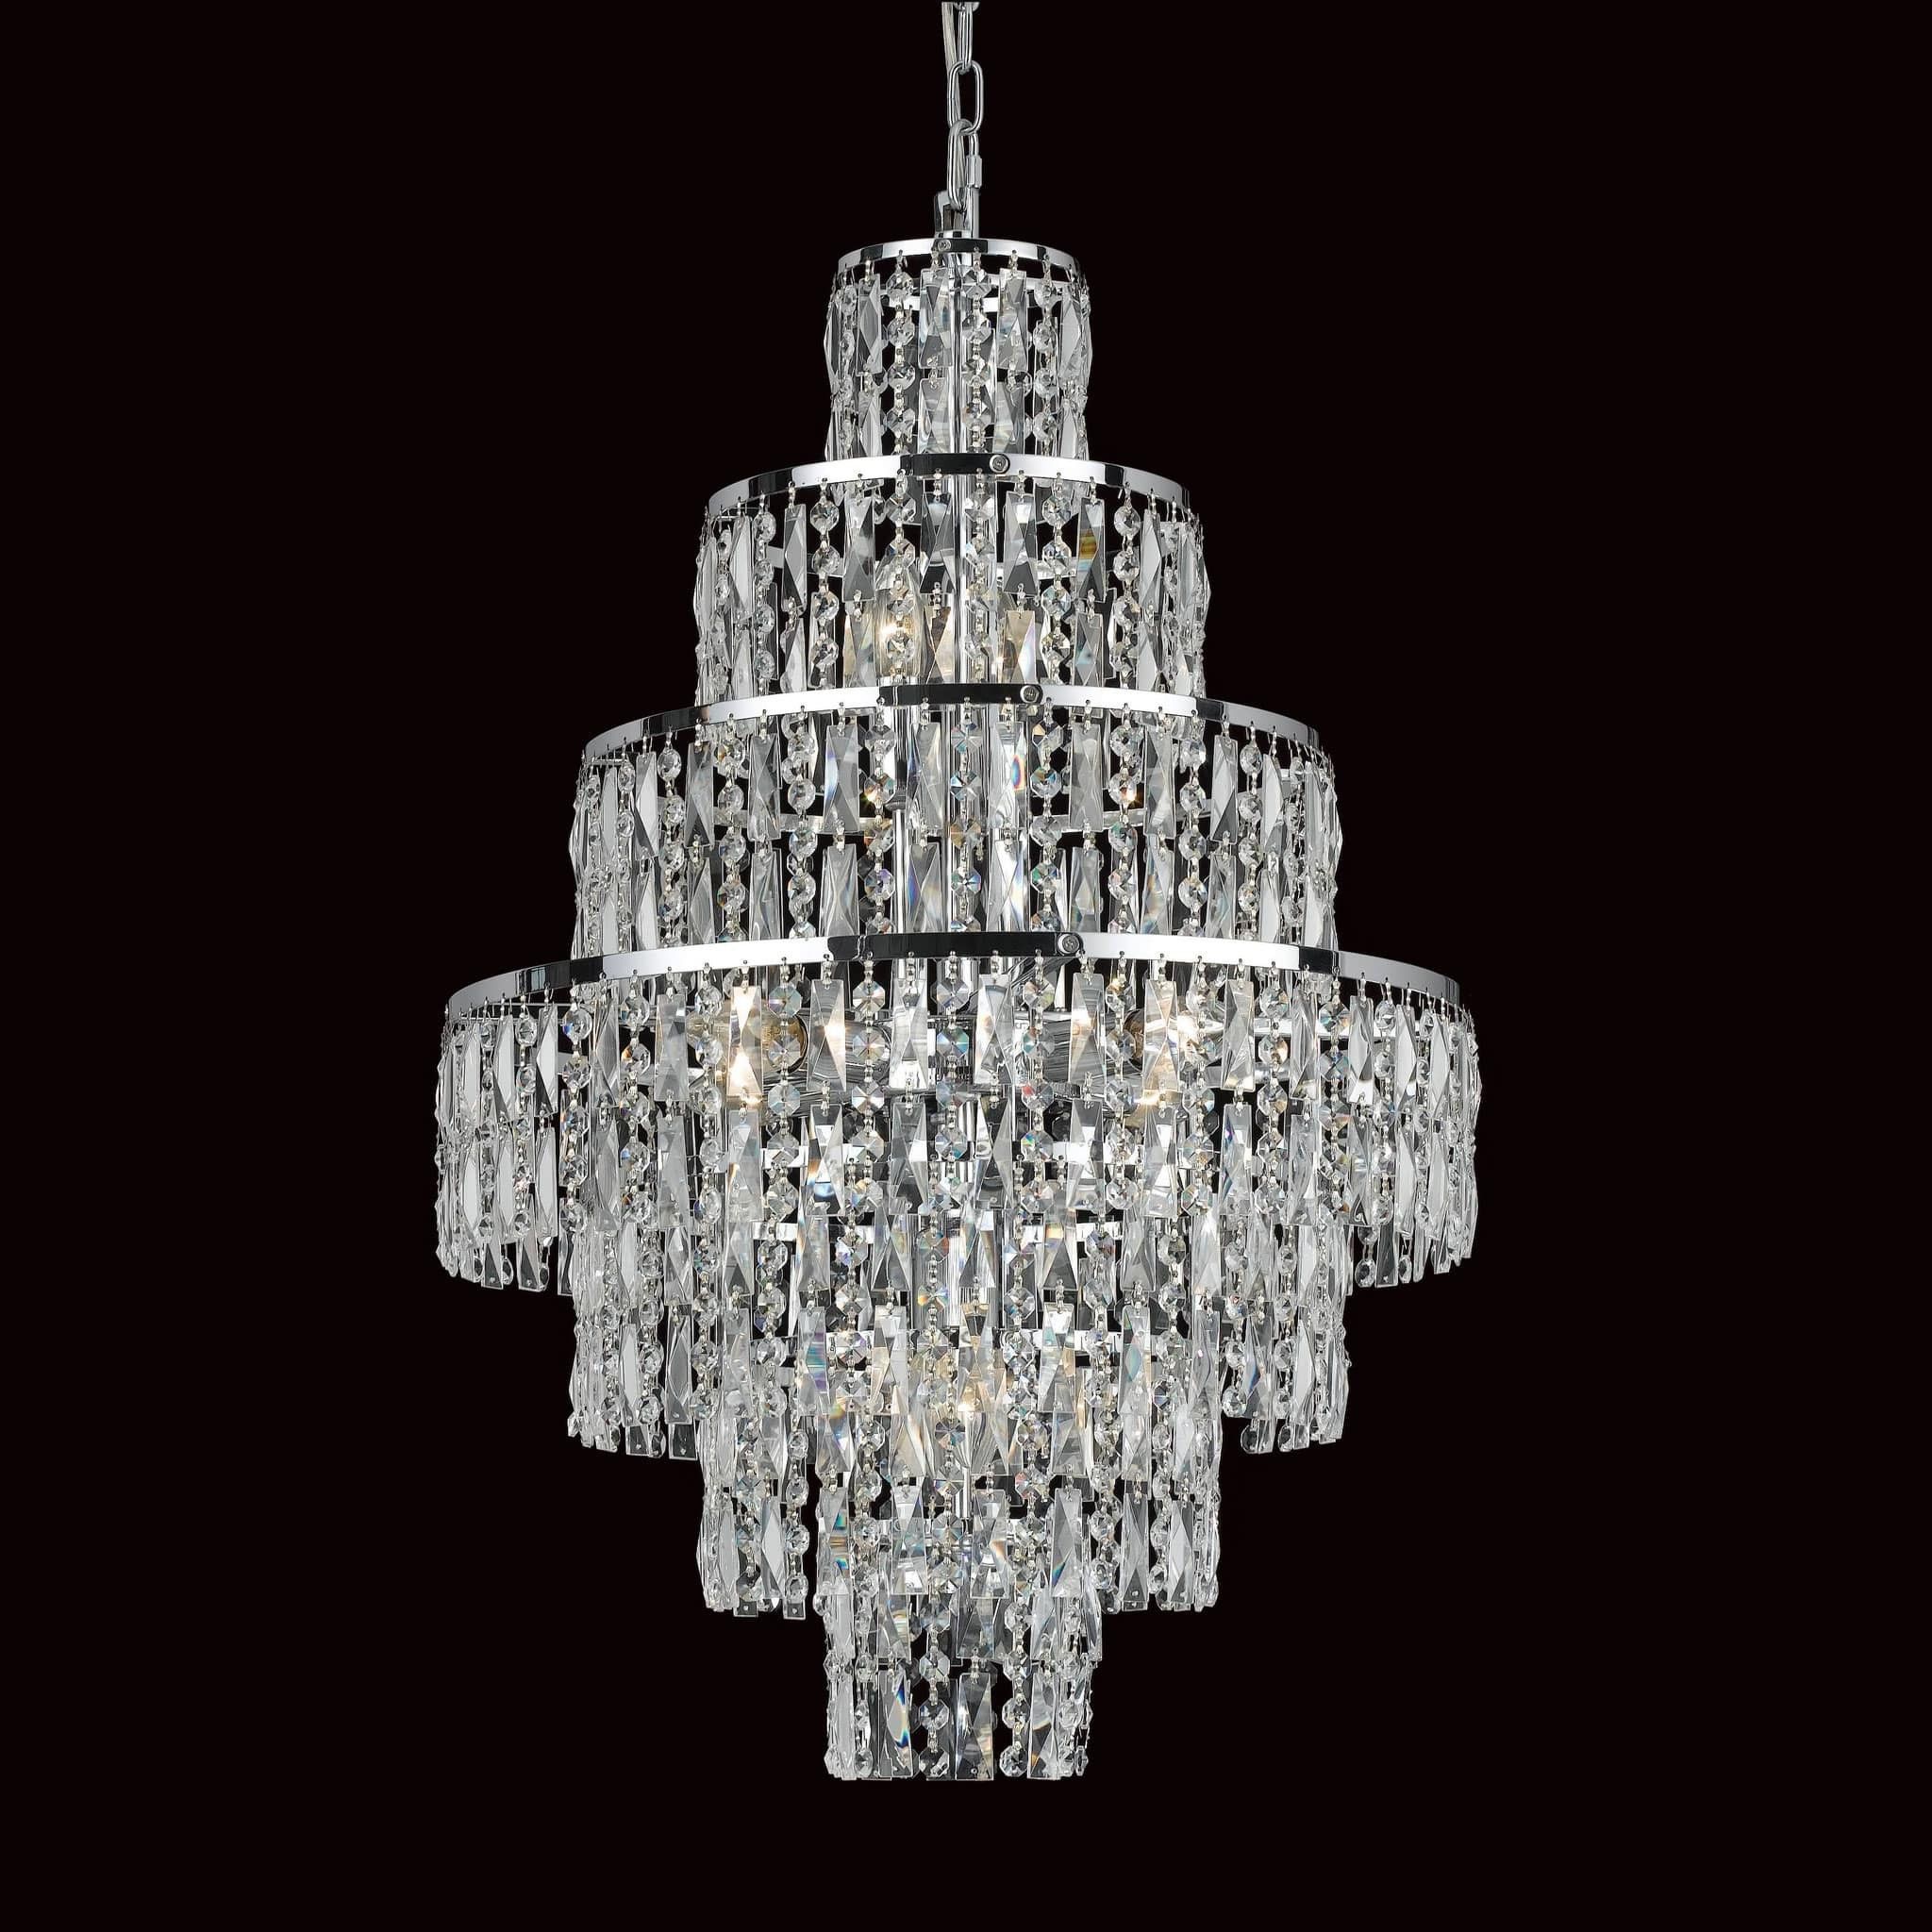 Impex Cf03220/08/ch New York 8 Light Cascade Chandelier Intended For Chrome And Crystal Led Chandeliers (View 1 of 15)